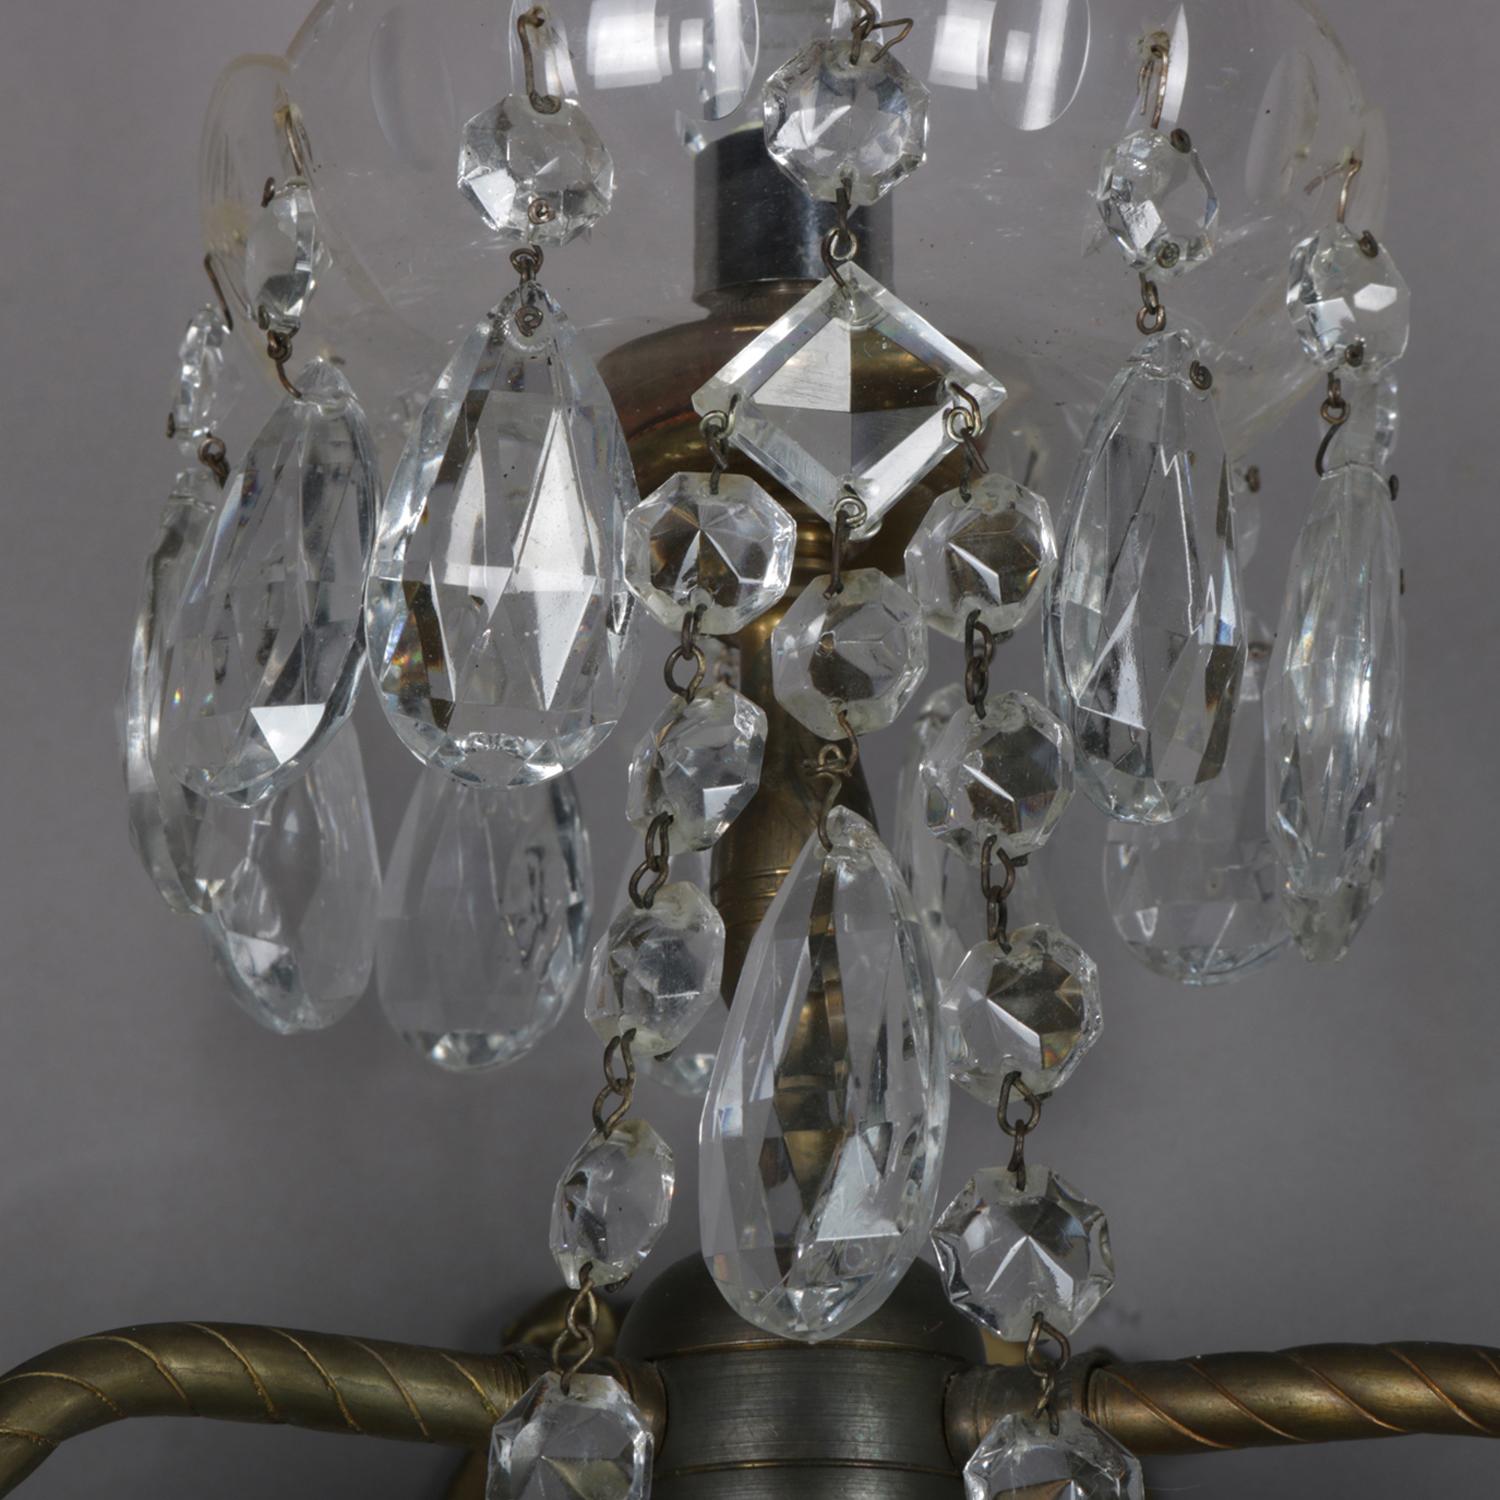 Pair of French Branch Chandelier Rock Crystal Electric Candle Light Wall Sconces (Messing)